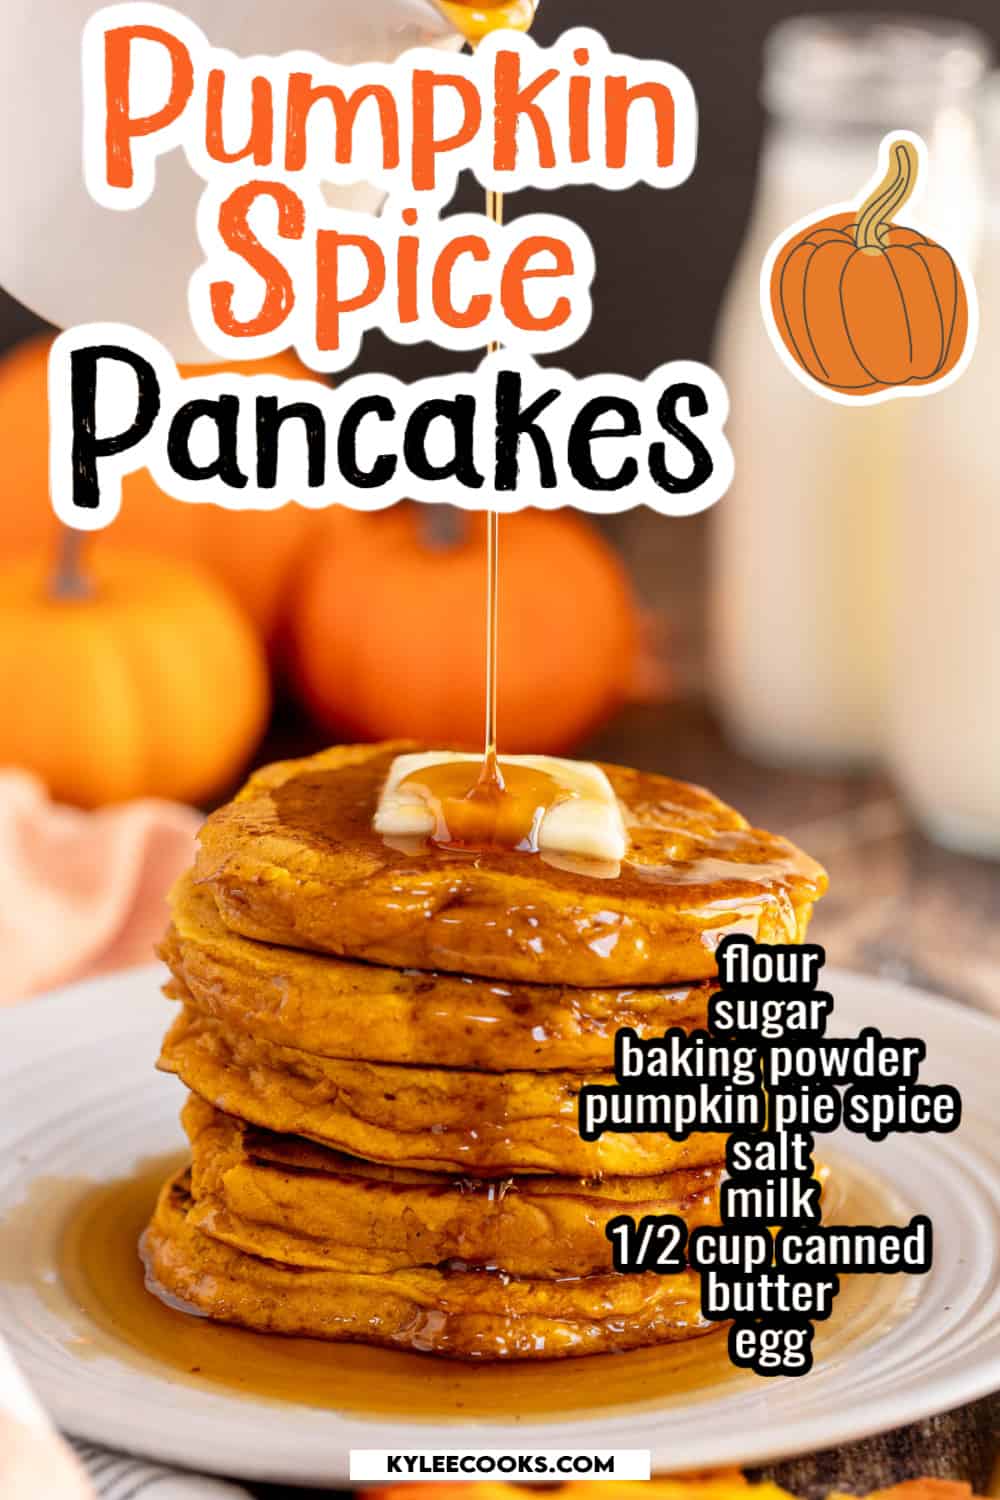 Pumpkin spice pancakes being drizzled with maple syrup, with ingredient images and recipe name overlaid in text.